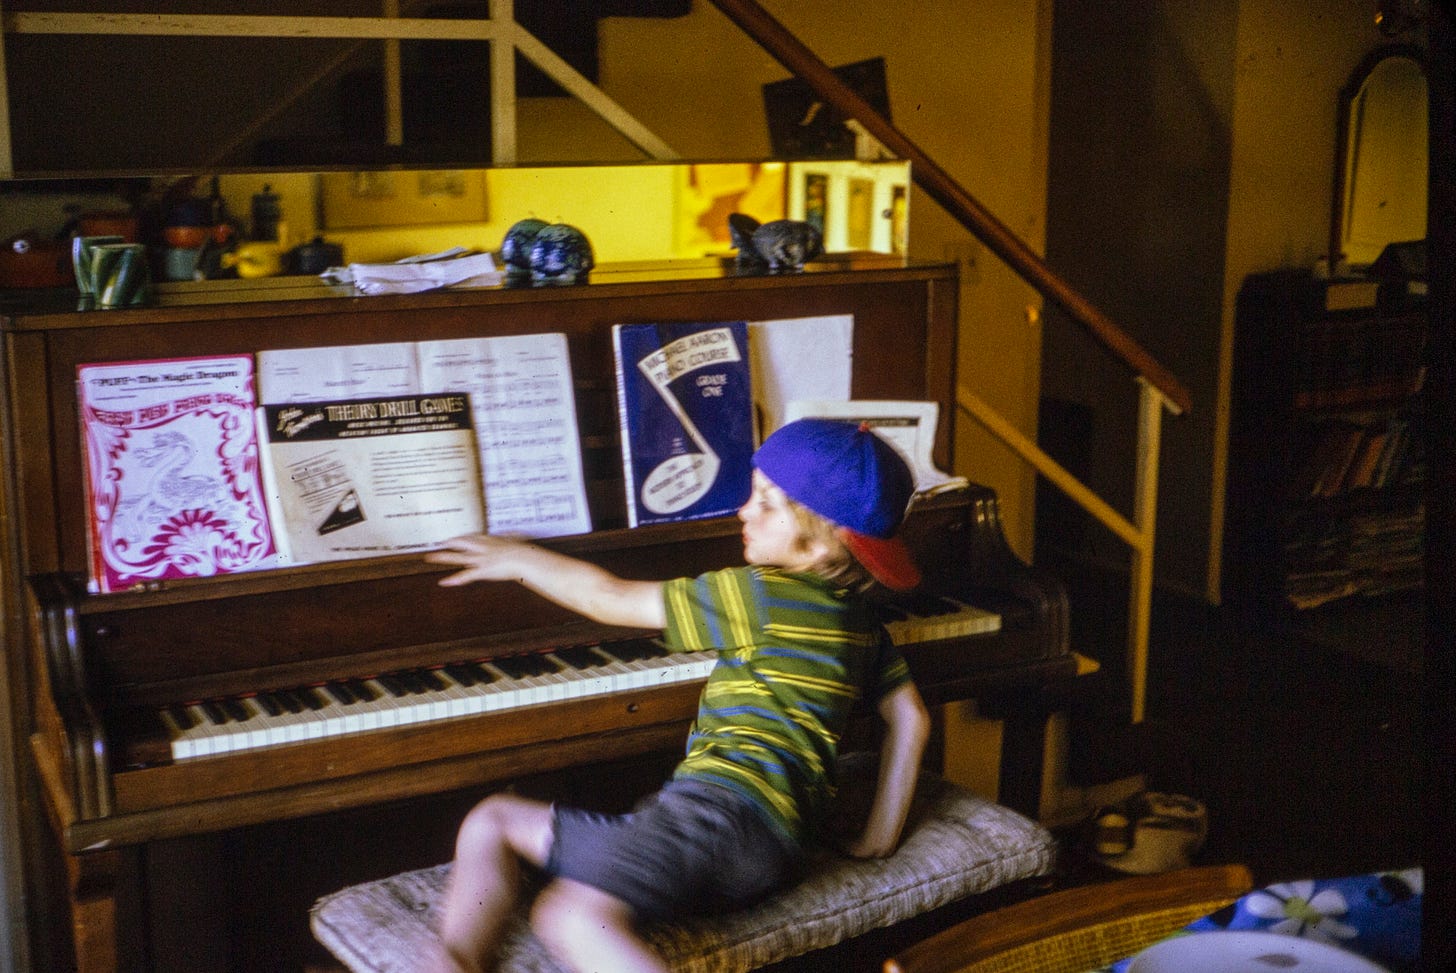 Picture of me as a child at our upright piano